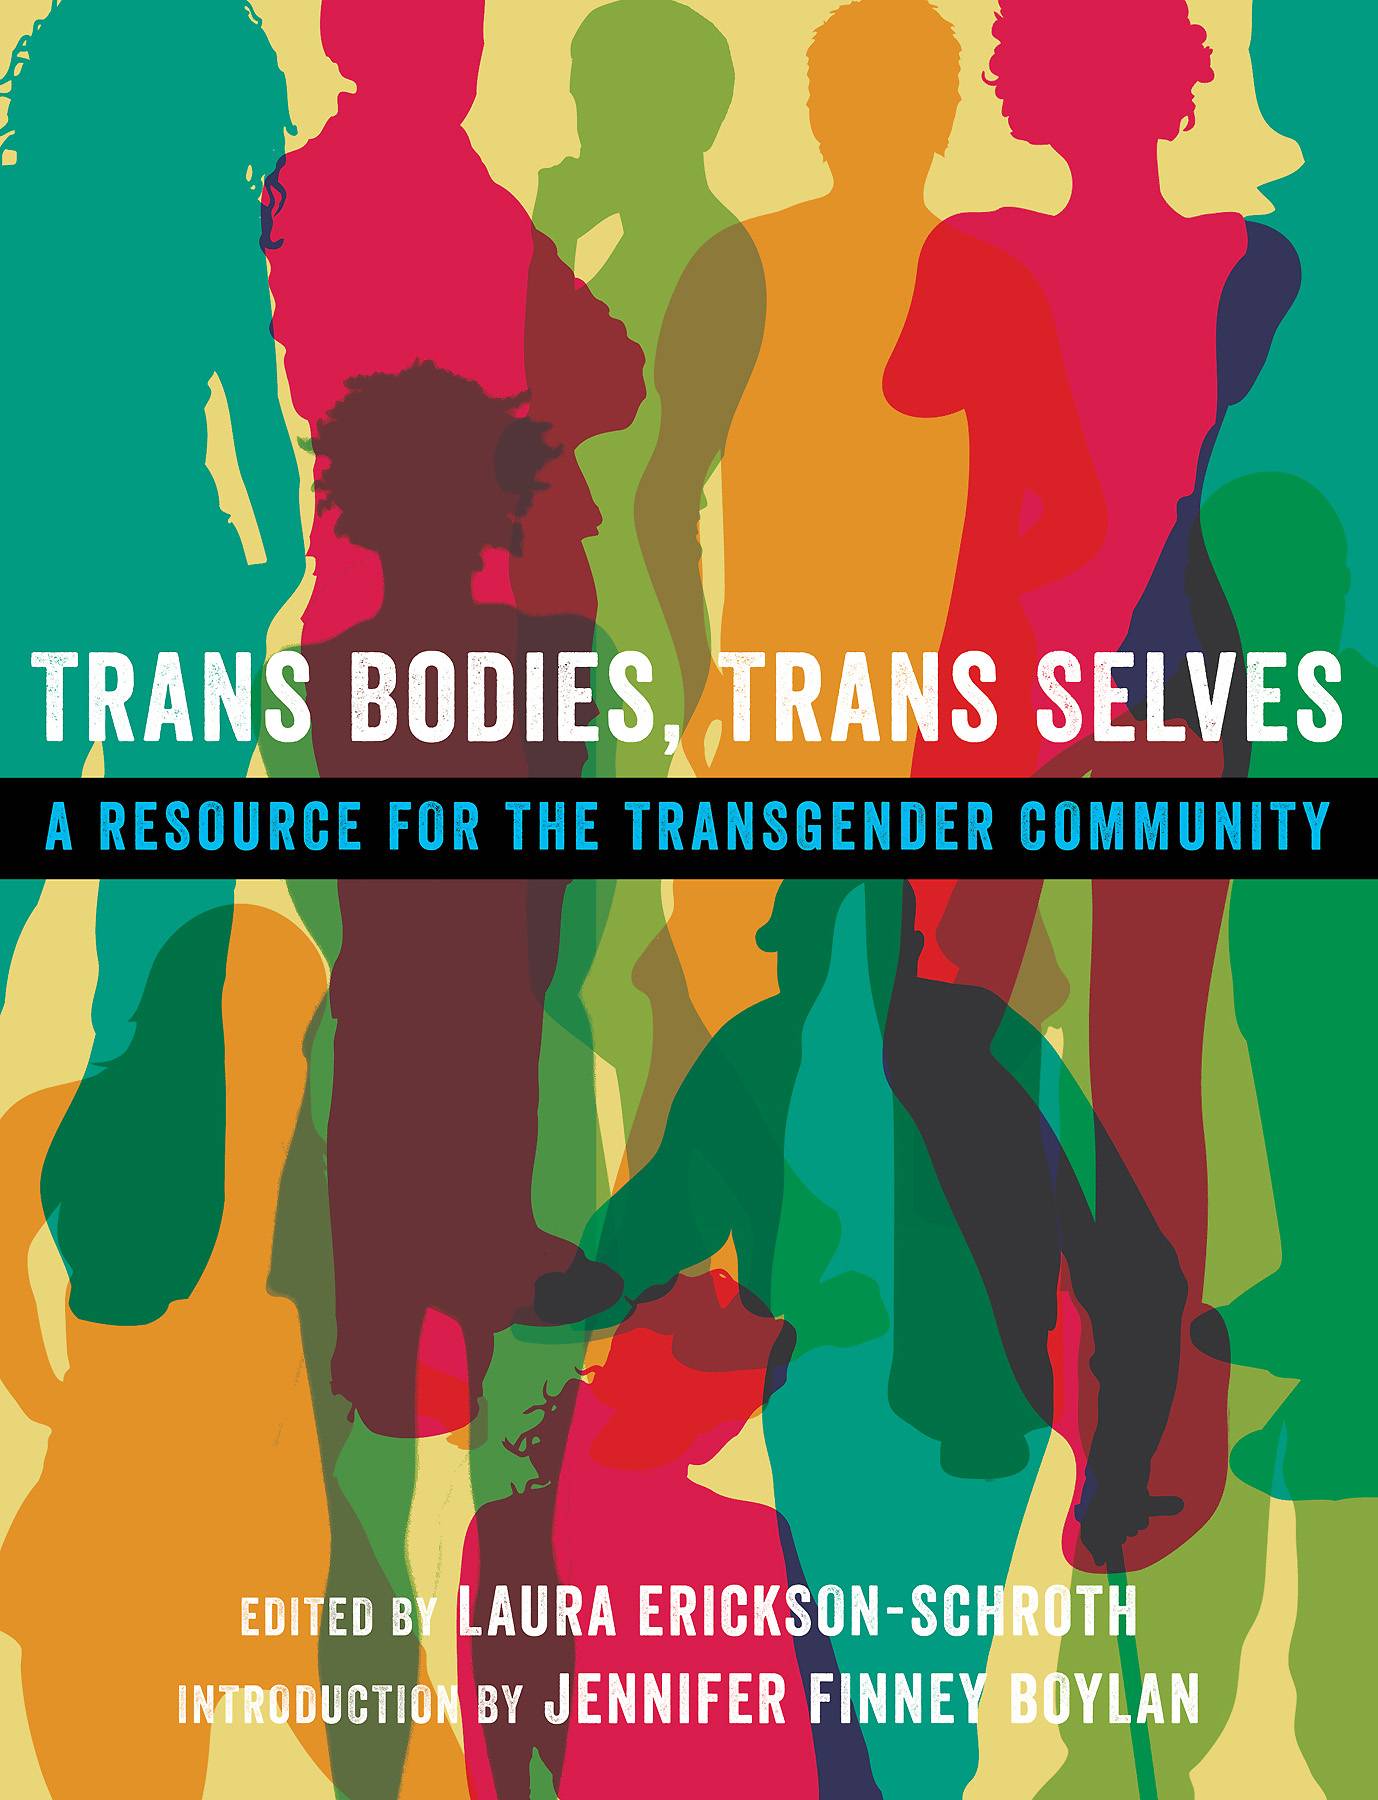 Trans Bodies, Trans Selves, Edited by Laura Erickson-Schroth